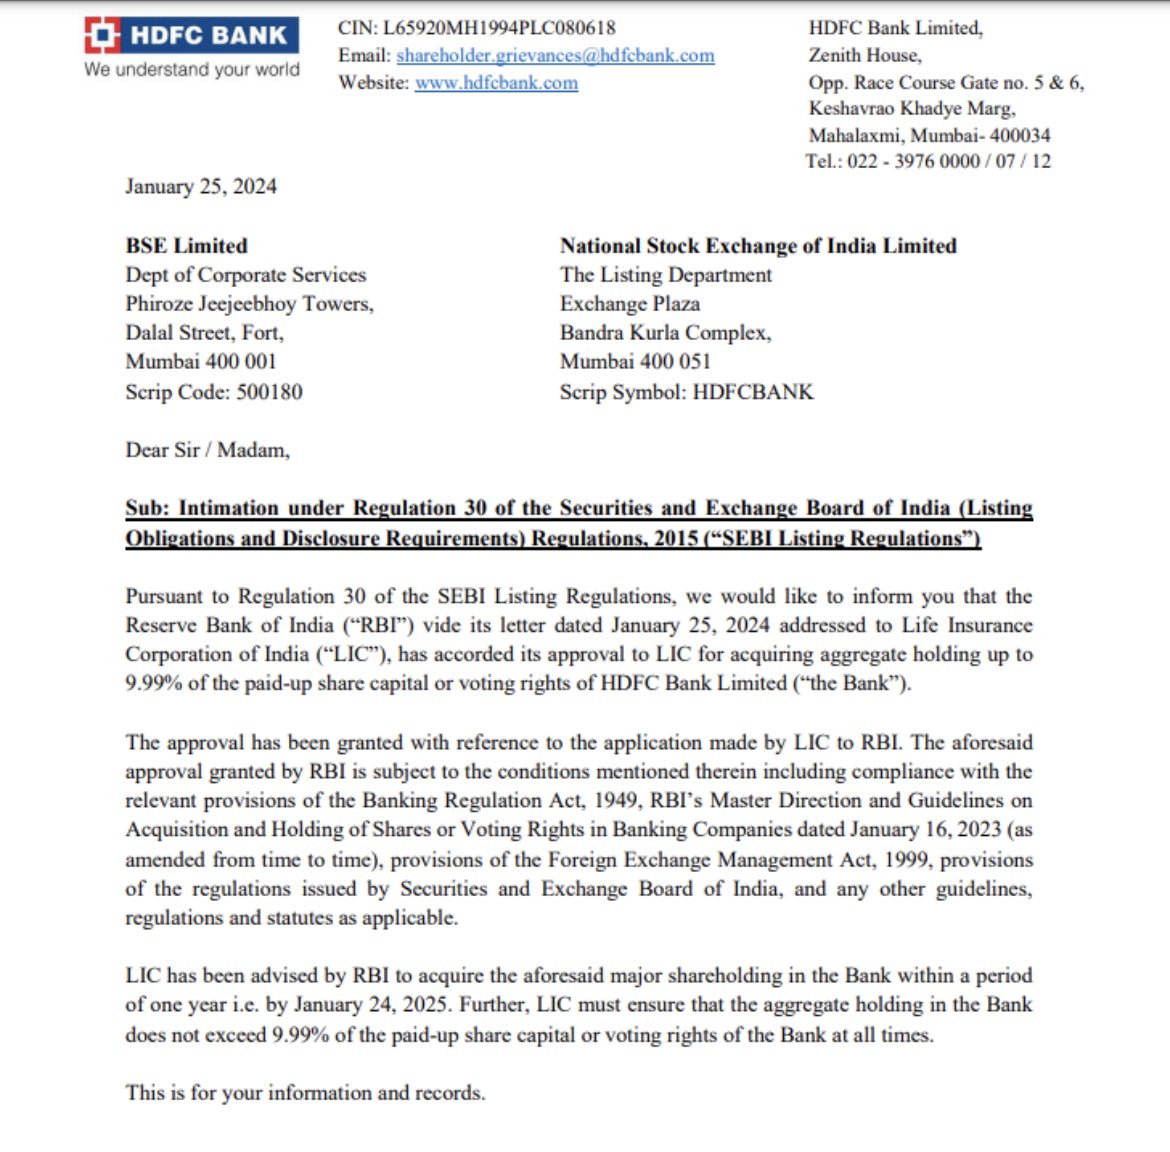 RBI allows LIC to acquire up to 9.99% holding in #HDFCBANK within a period of one year i.e. by January 24, 2025

#dhanvifinserv #sharemarketindia #Dhanvi #sharemarketnews #intraday #bse #niftyfifty #StockMarketindia #hdfcbankshare #HDFC #licofindia #StockInvestment #stockinfocus